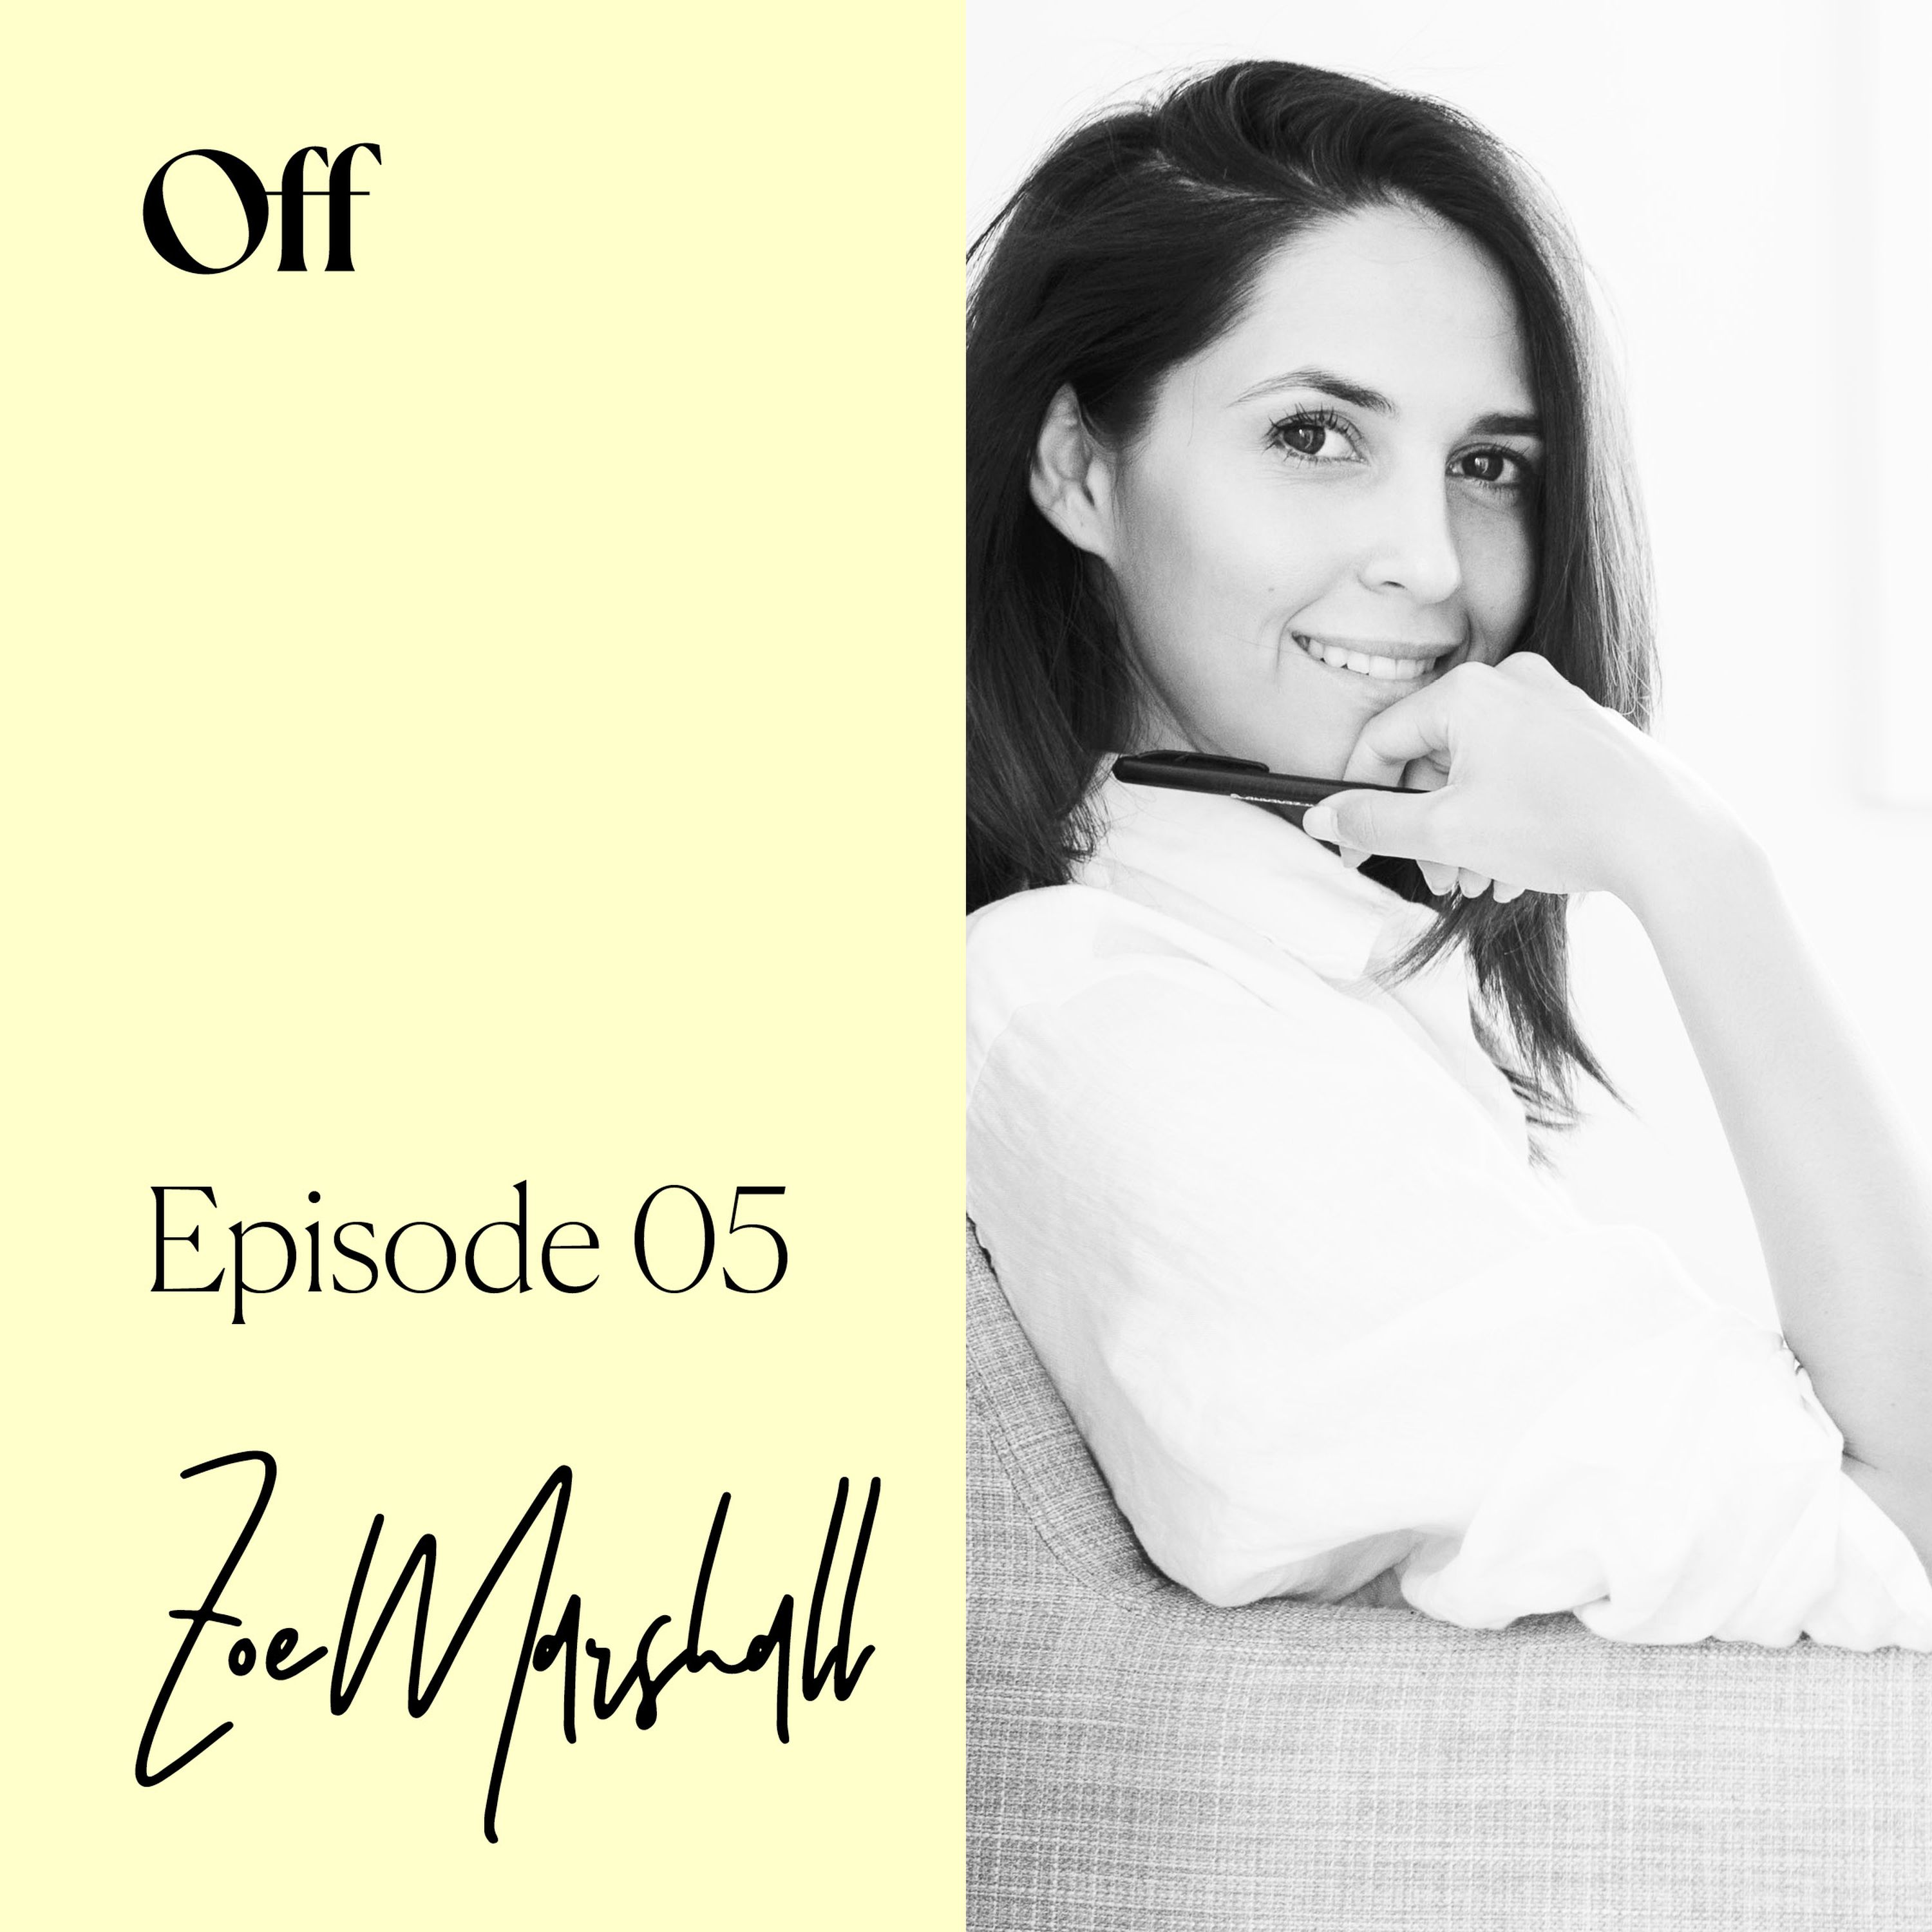 Zoe Marshall opens up about losing her mum & how that experience has shaped her outlook on life.